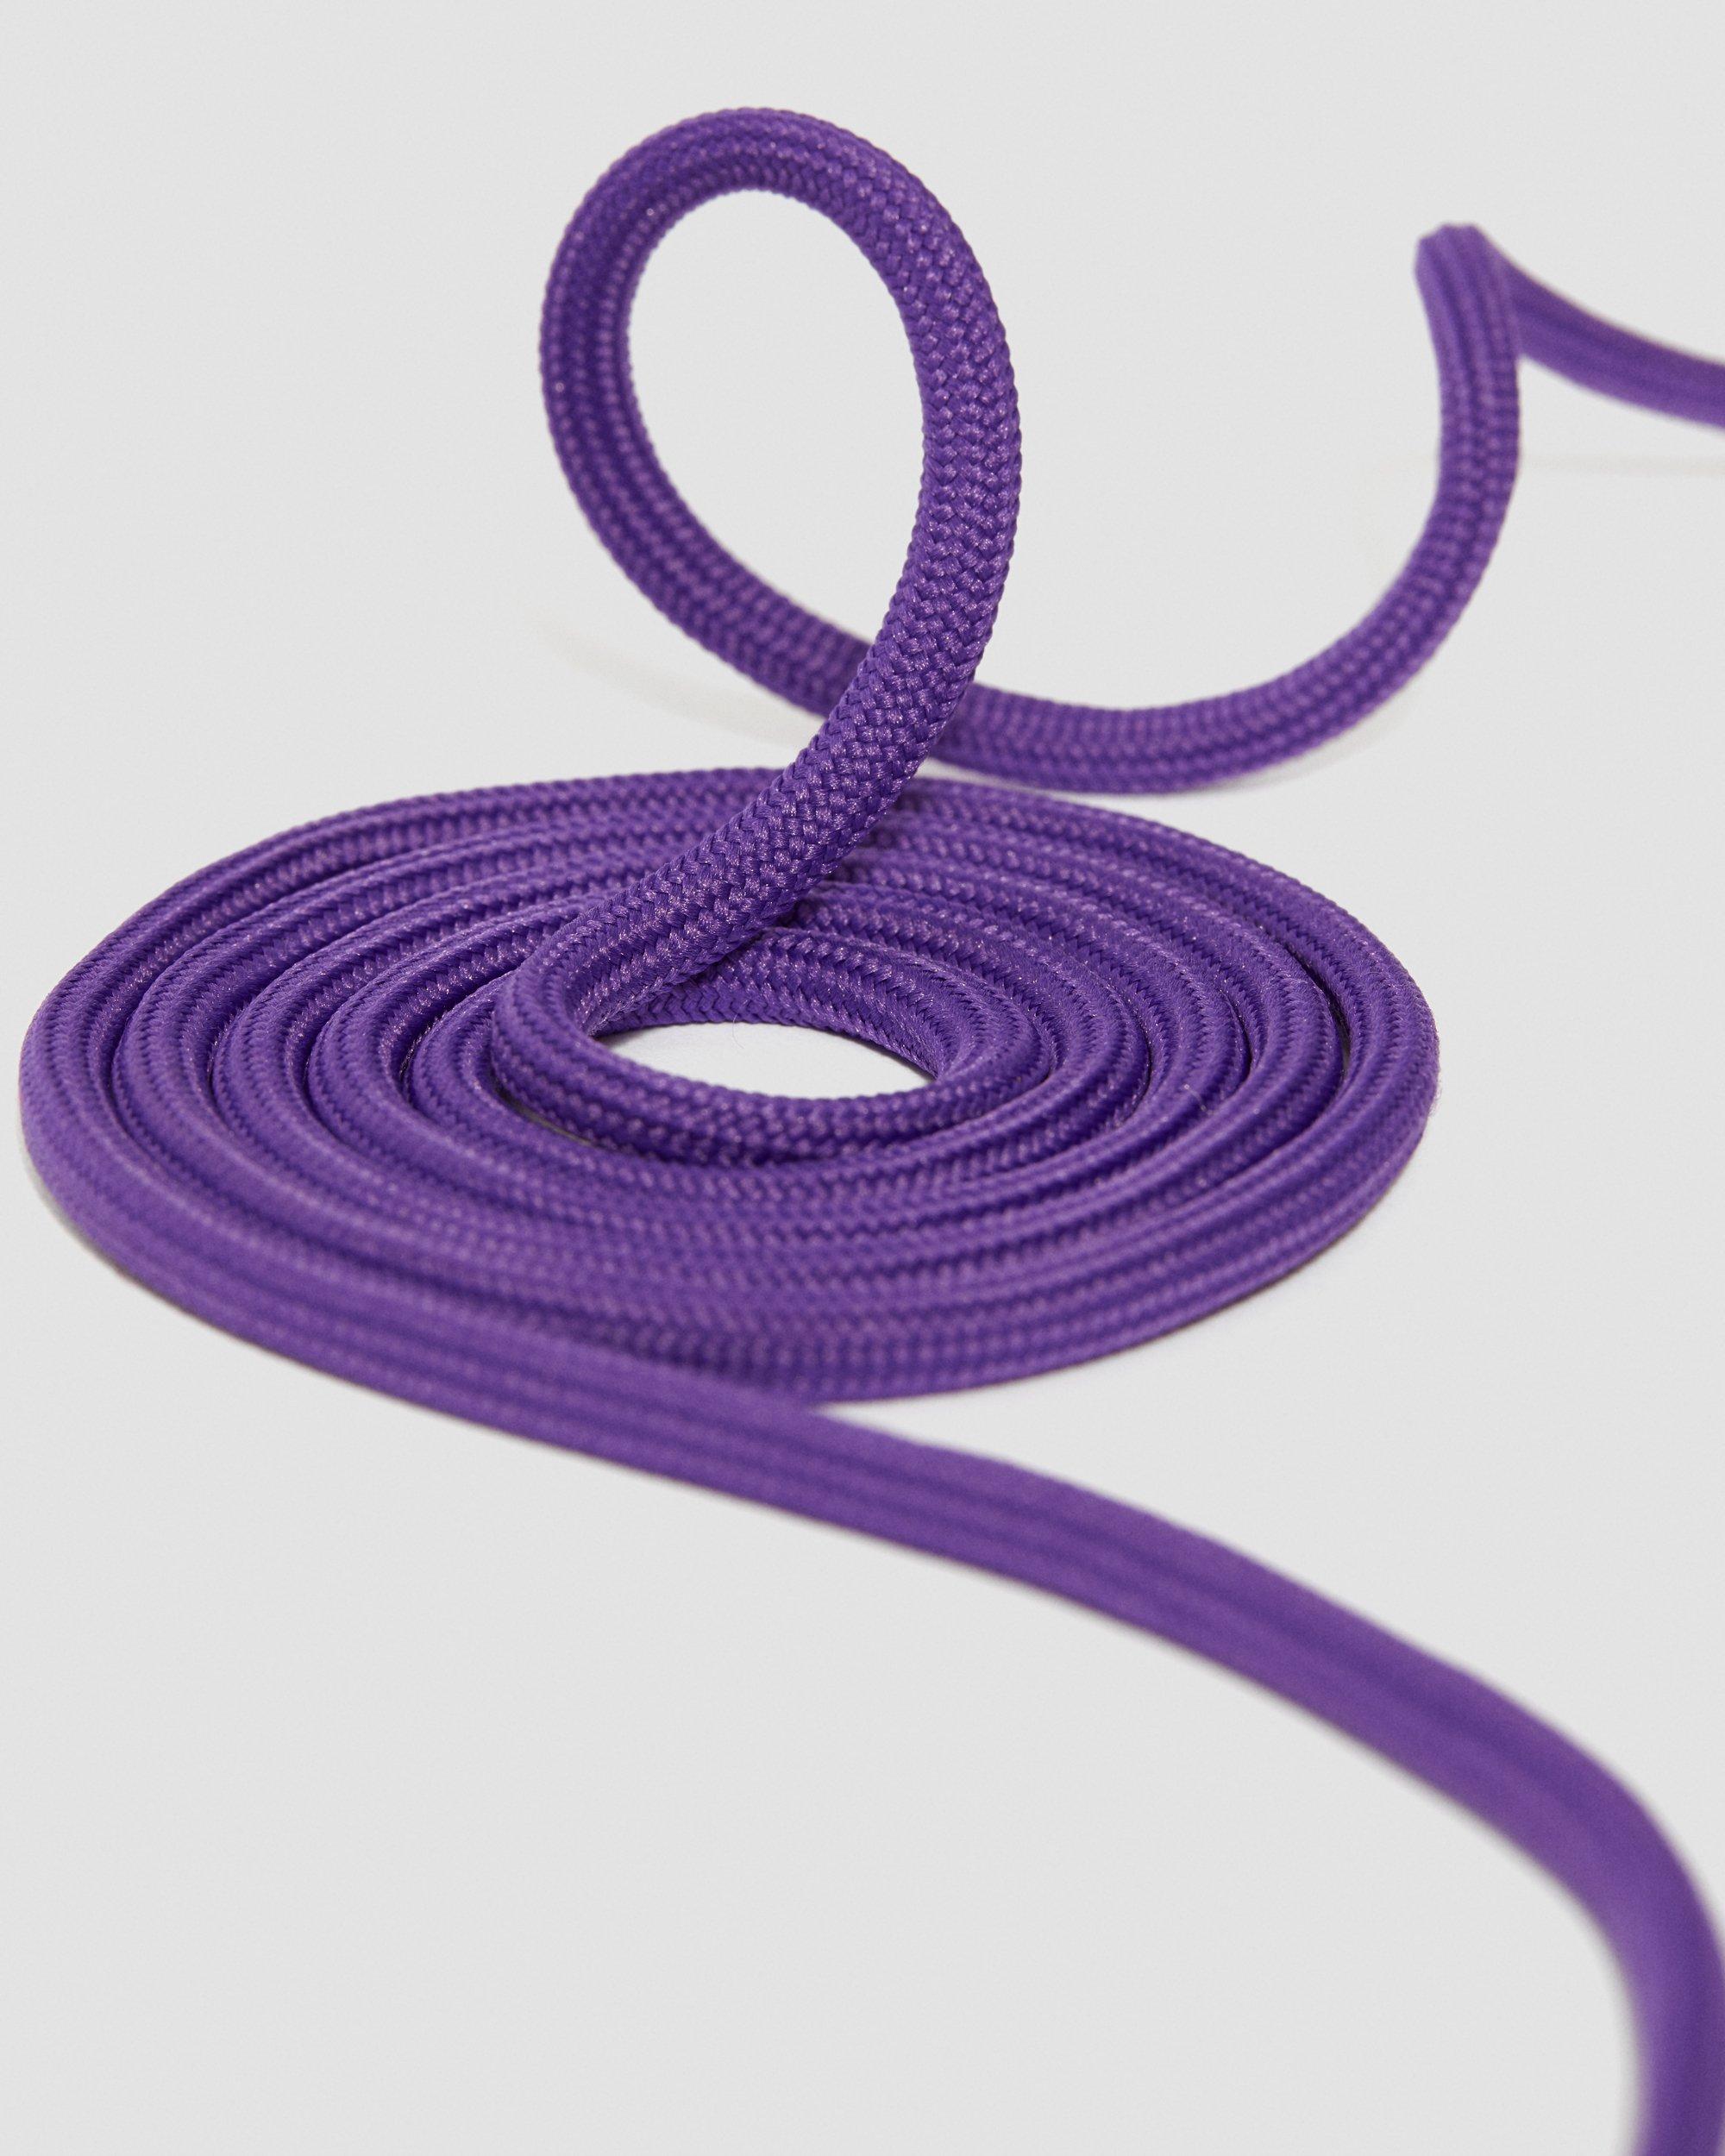 55 Inch Round Shoe Laces (8-10 Eye) in Purple